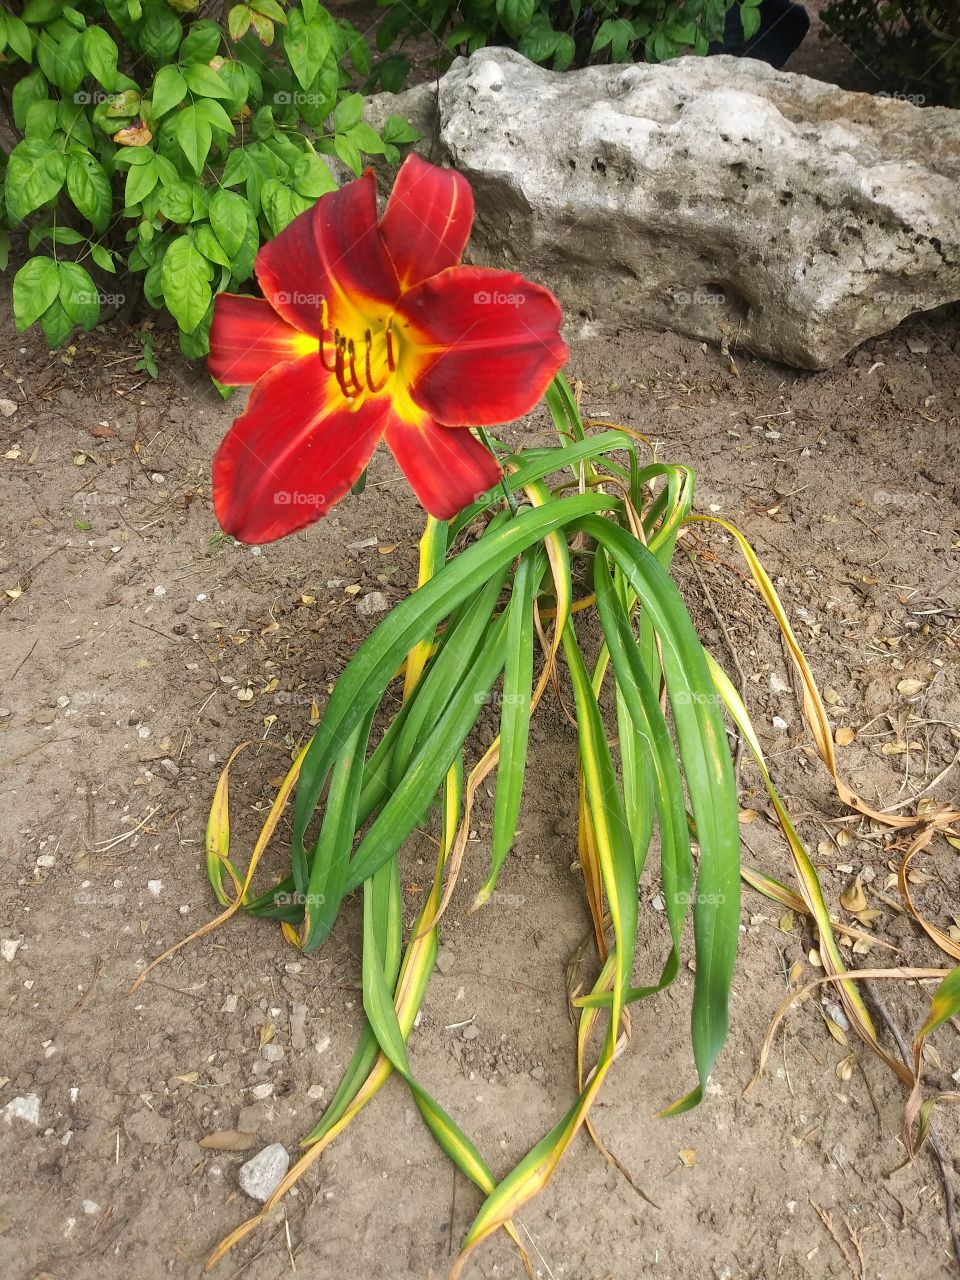 fire lily